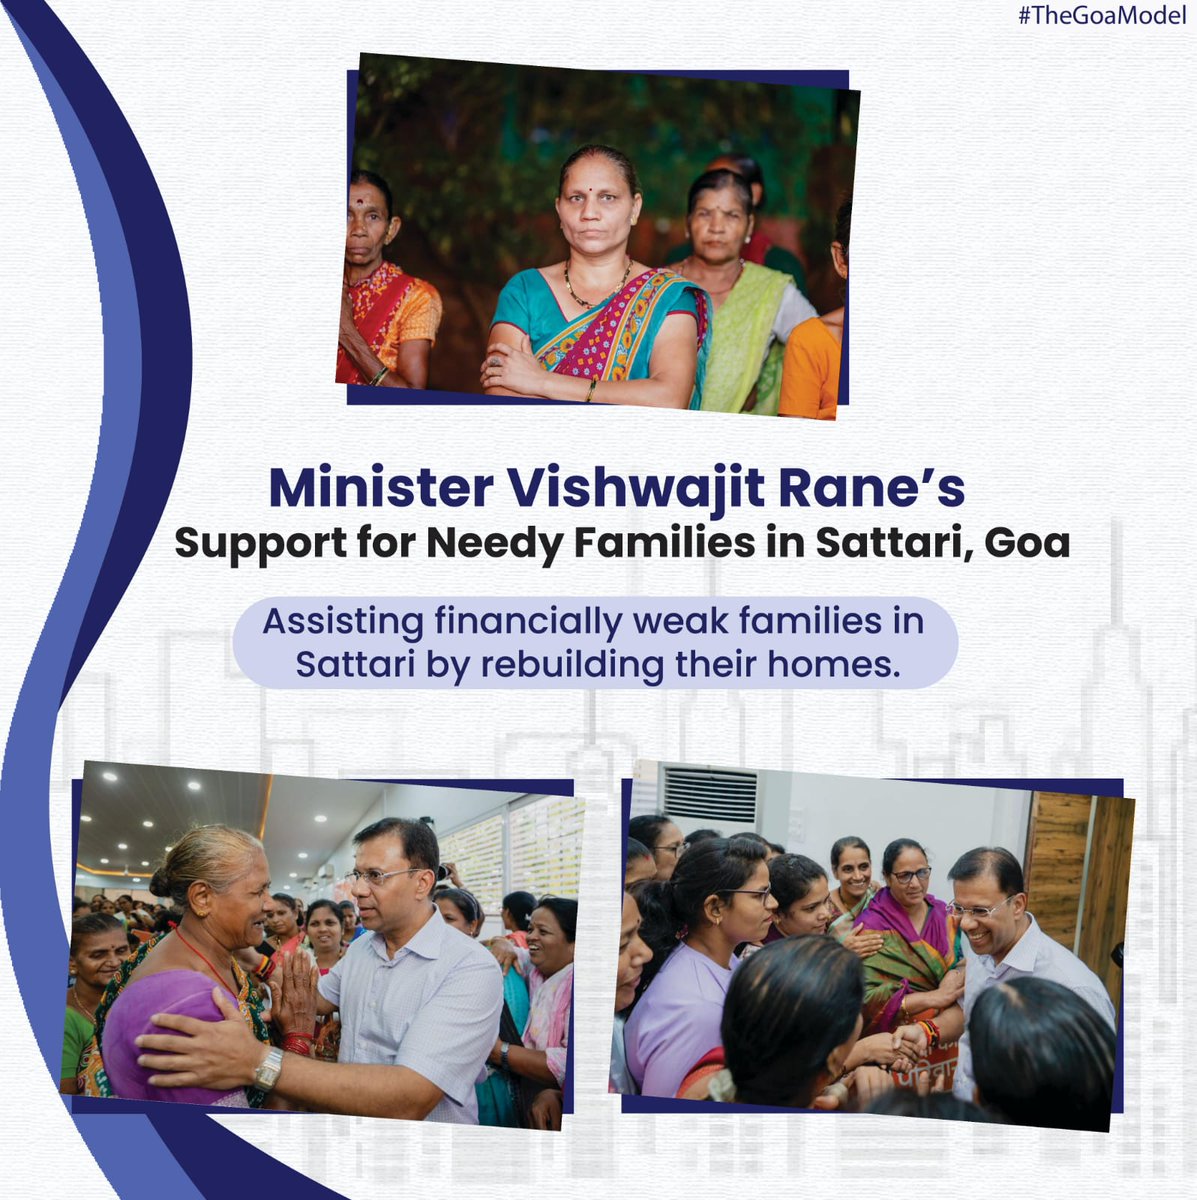 Kudos to Minister Vishwajit Rane for stepping up to help vulnerable families in Sattari, Goa. His commitment to rebuilding homes and supporting those in need is truly commendable. #VishwajitRane #Sattari #TheGoaModel
 #GoaSupport #SupportingFamilies #GoaLeadership